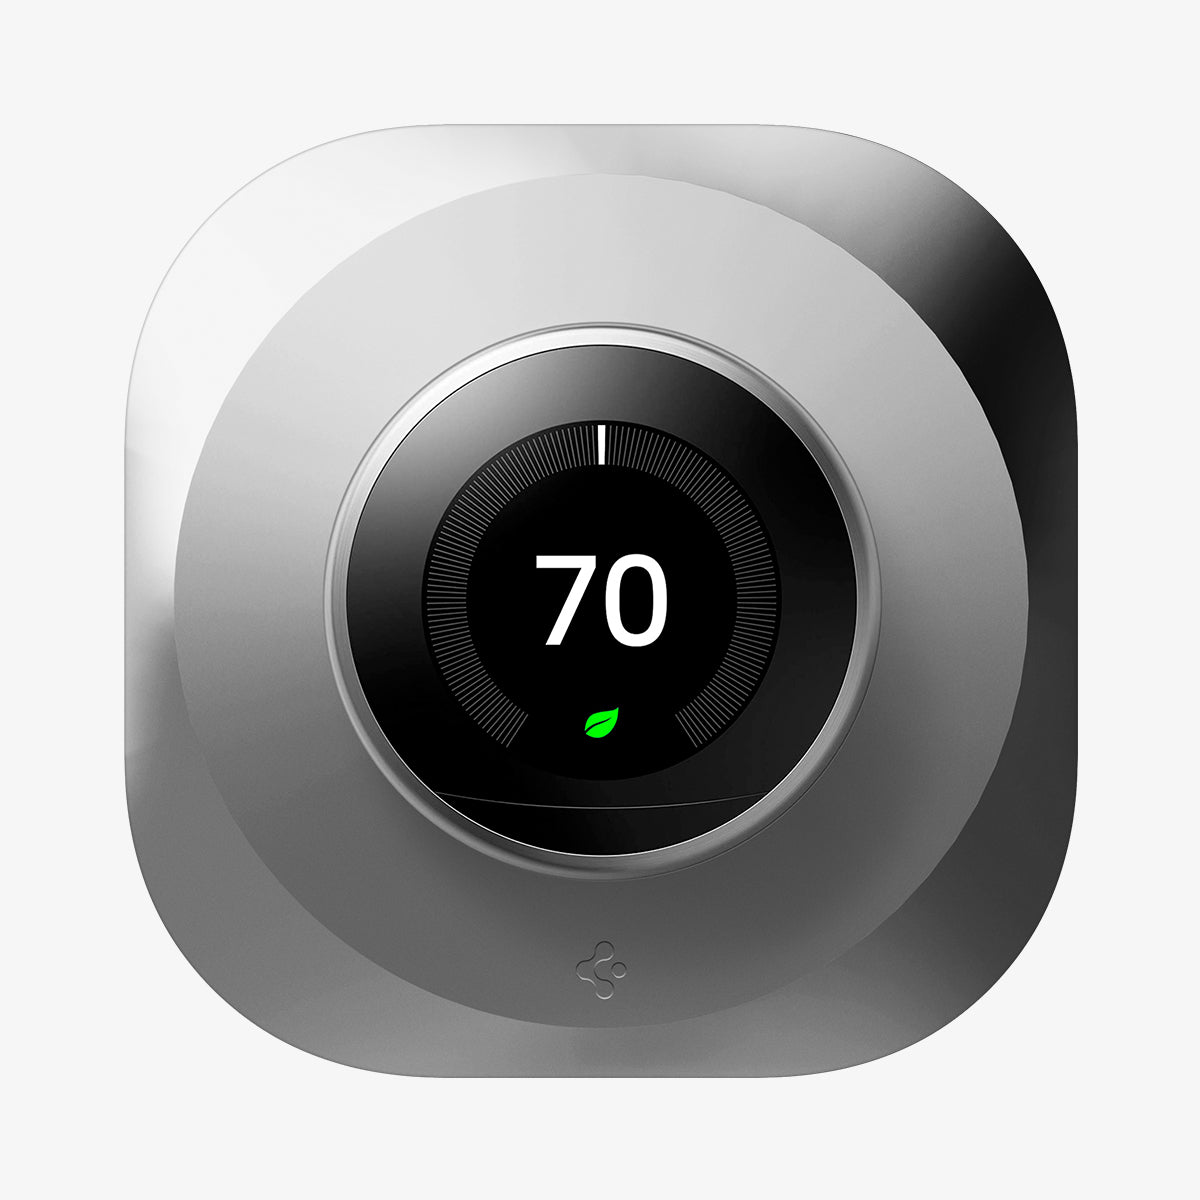 AHP03712 - Google Nest Learning Thermostat 3G Wall Plate in stainless steel showing the front